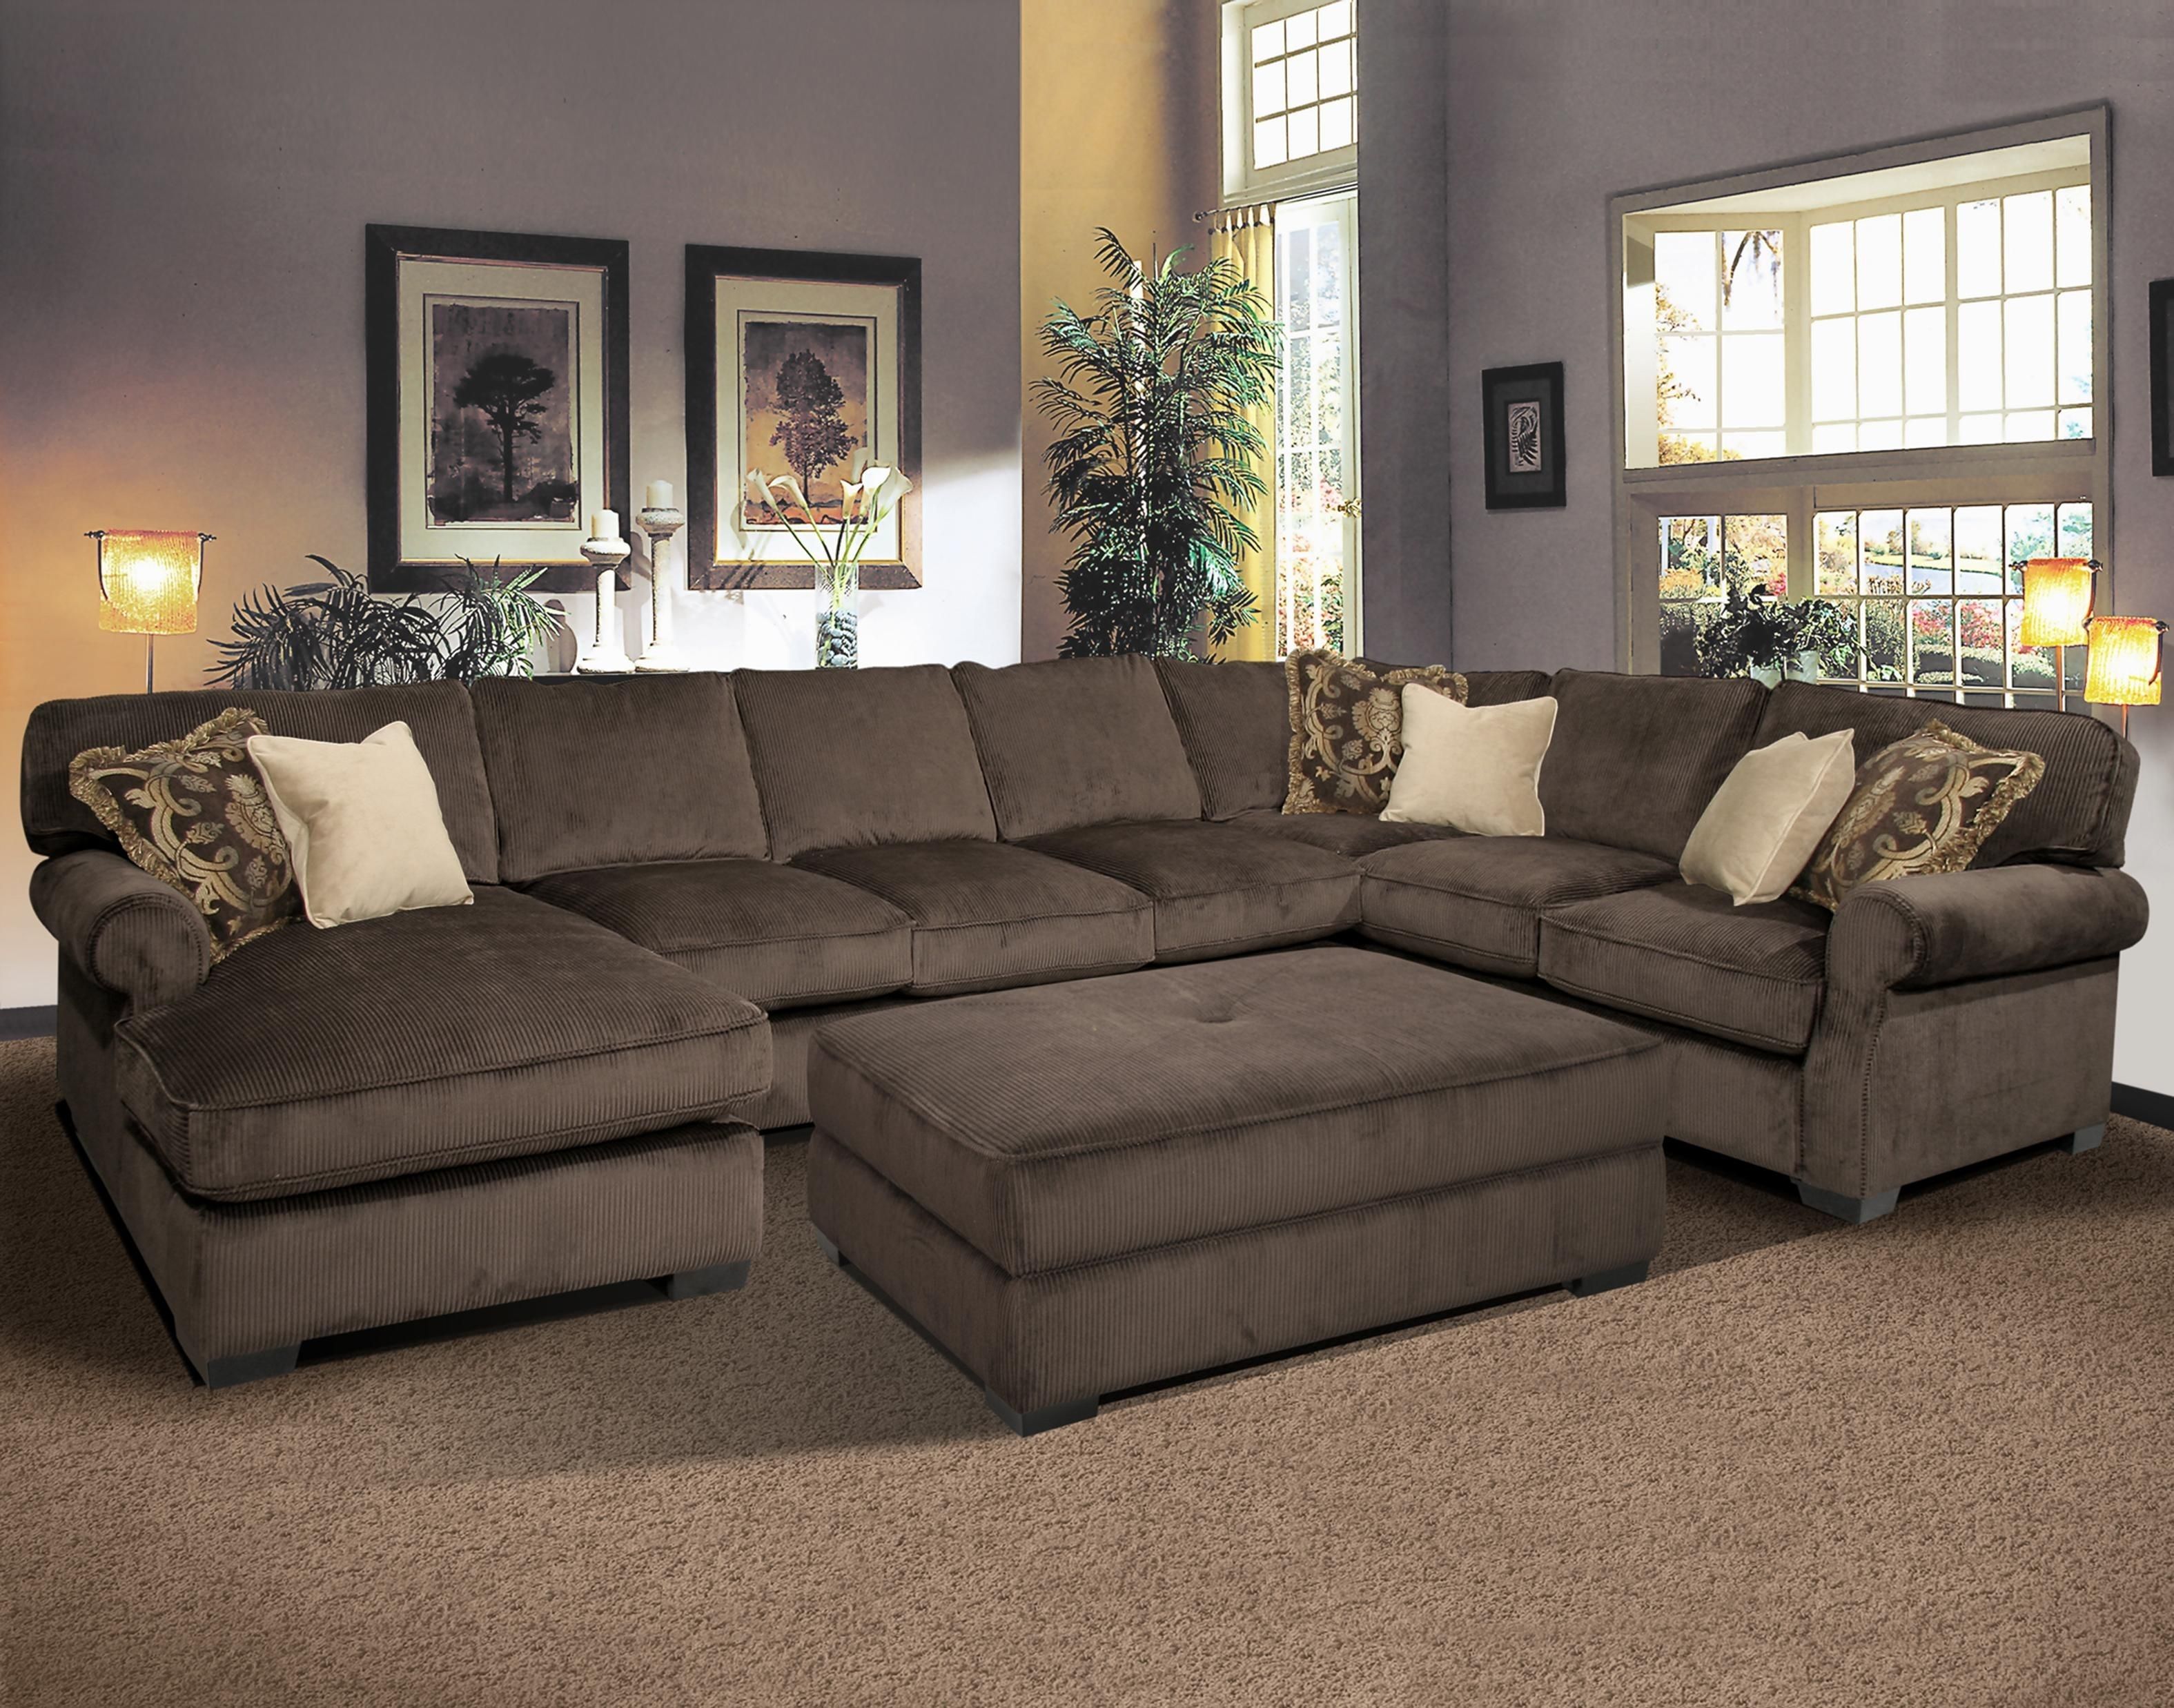 Grand Island Oversized Cocktail Ottoman For Sectional Sofa Within Sofas With Chaise And Ottoman (View 3 of 10)